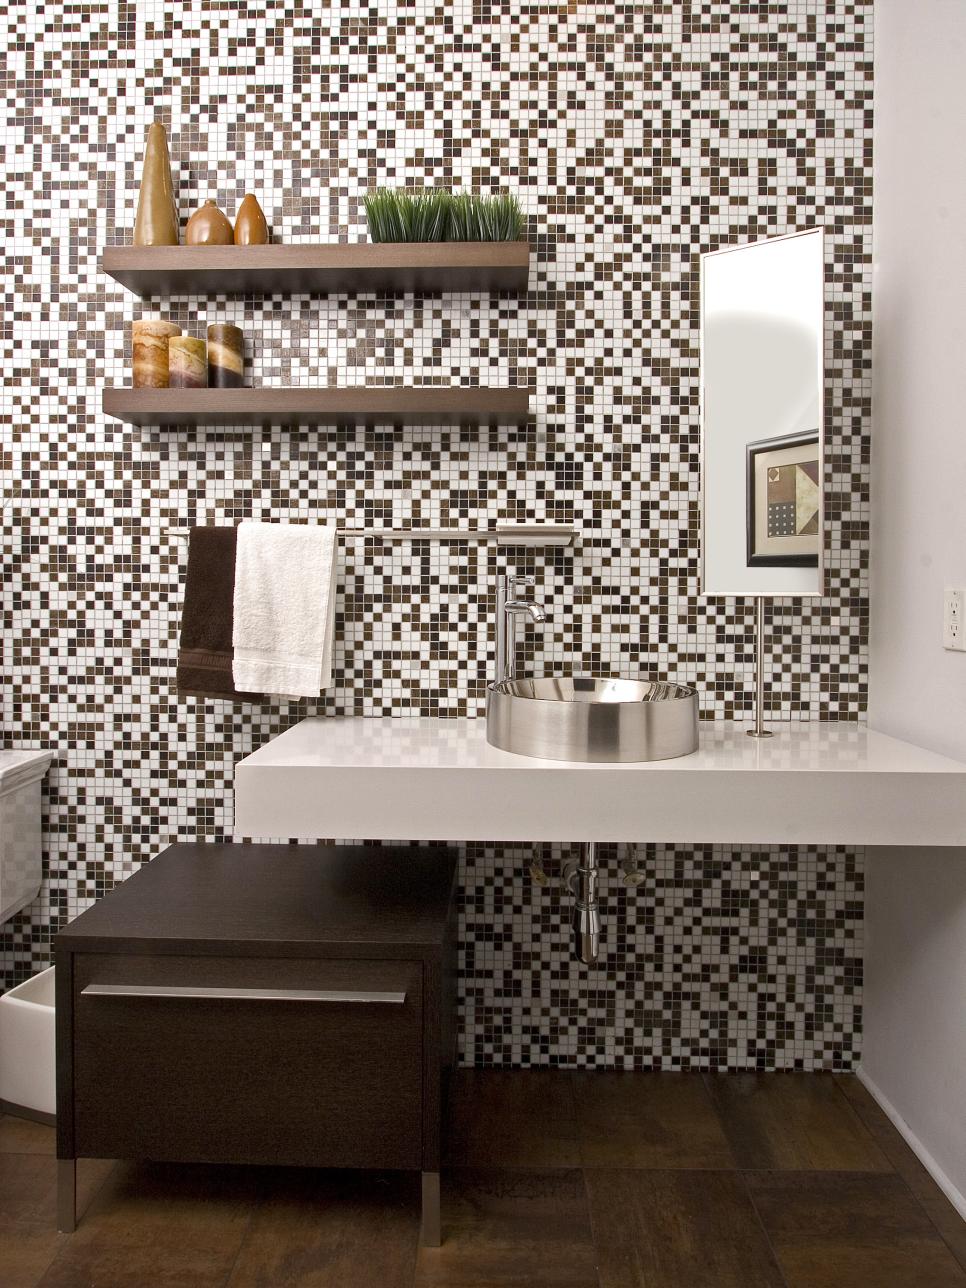 Modern Bathroom With White and Brown Mosaic Tile | HGTV